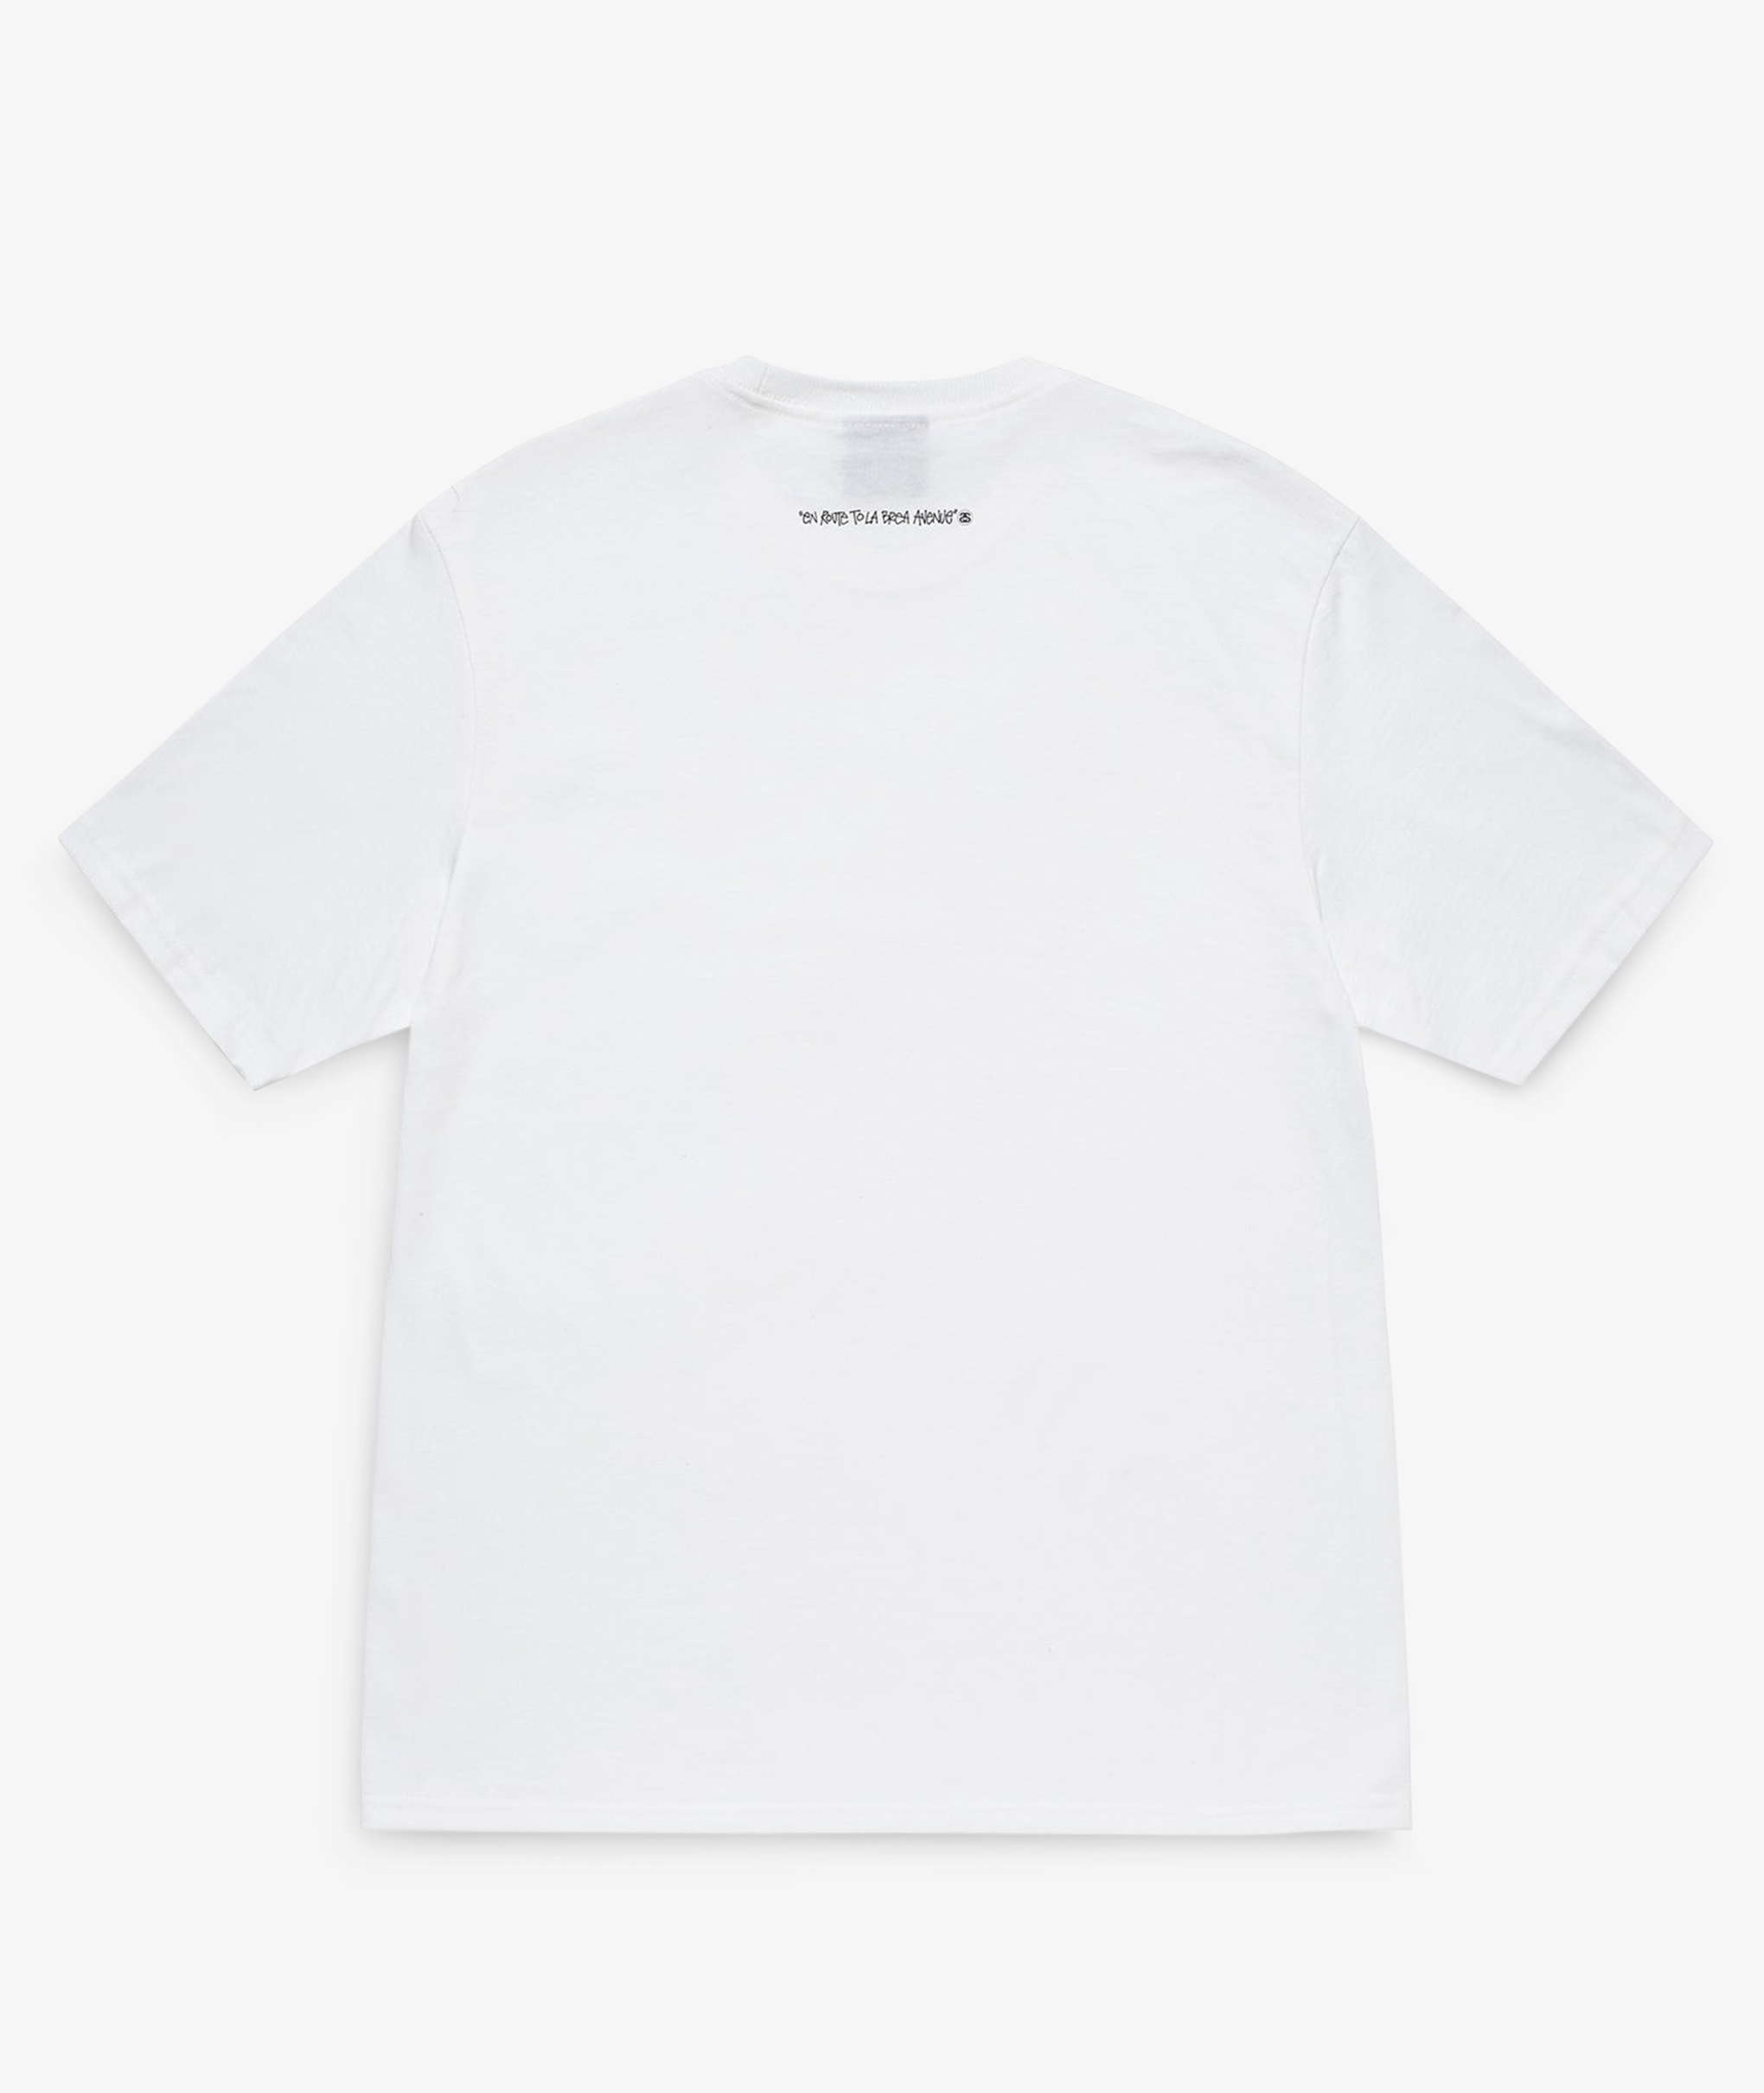 Norse Store | Shipping Worldwide - Stüssy SS Highway Tee - White